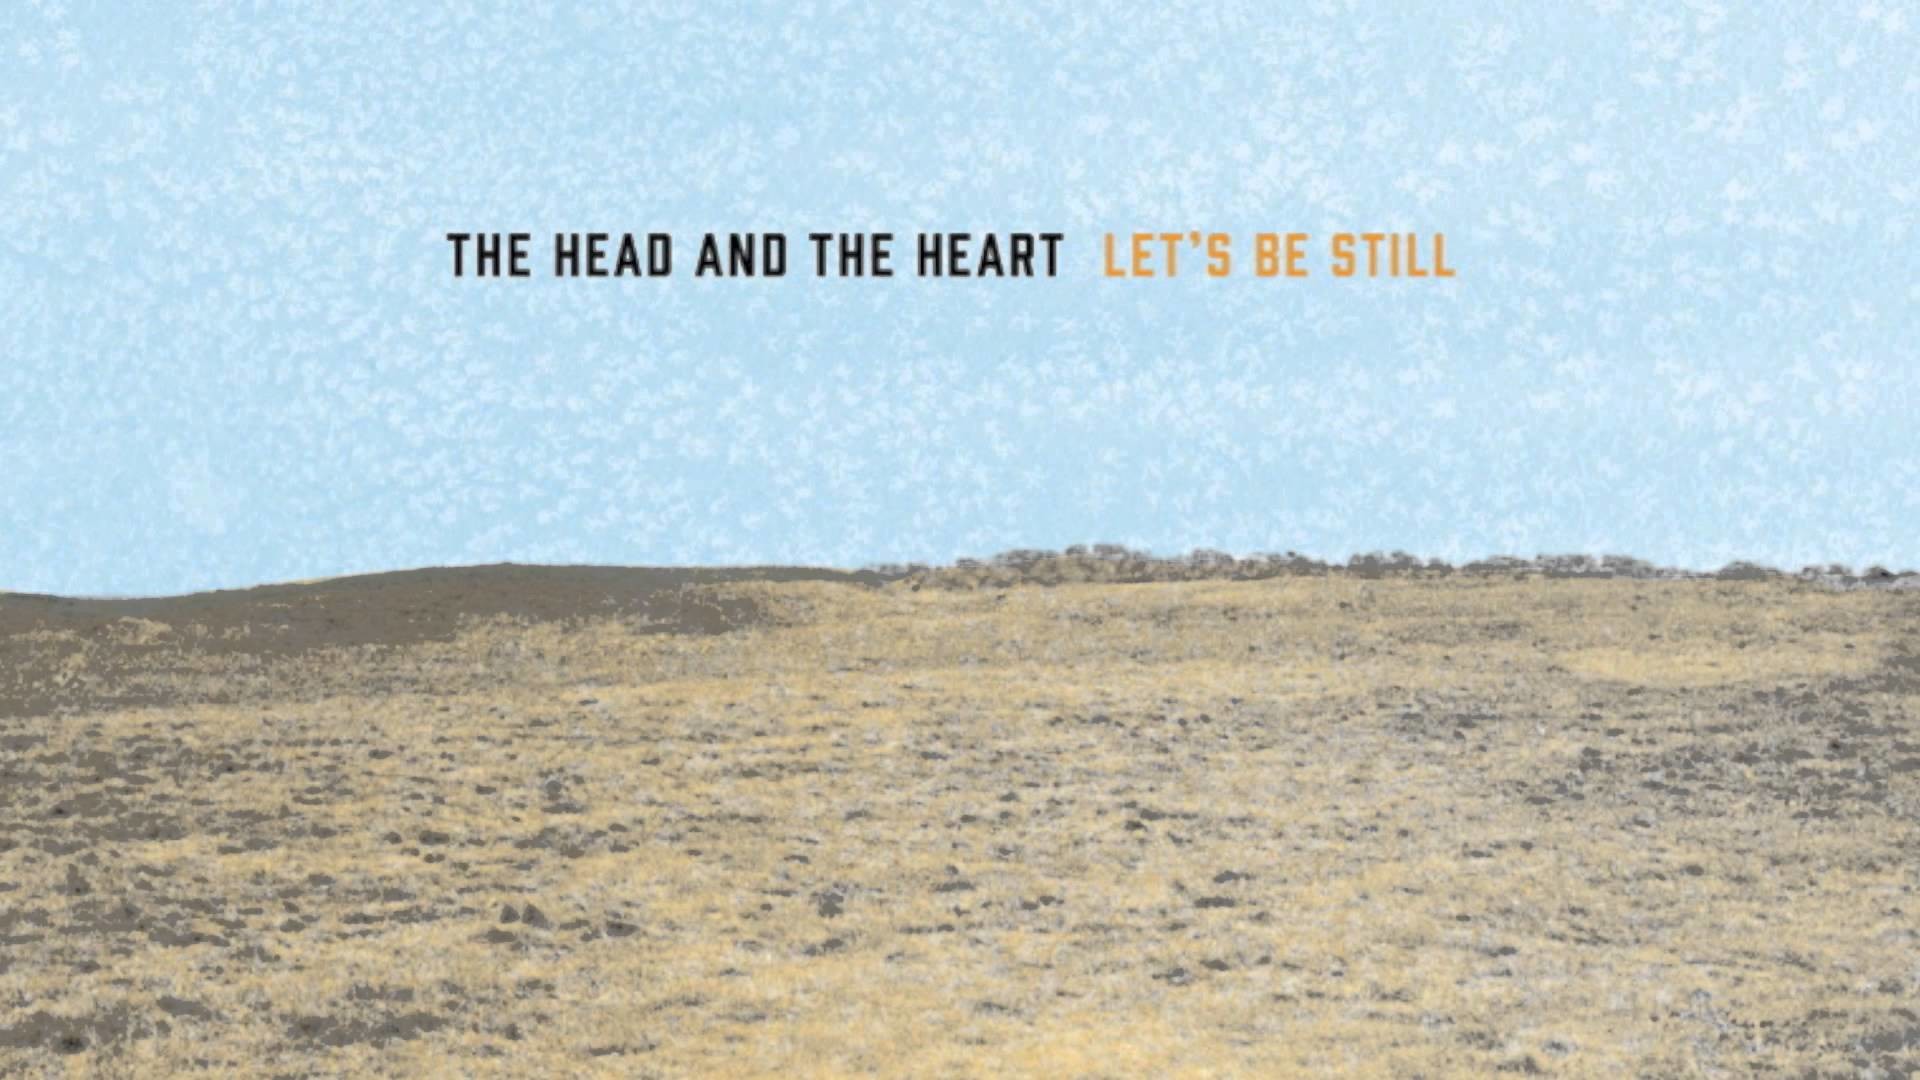 1920x1080 The Head and the Heart - Let's Be Still “The world's not forgiving, Of